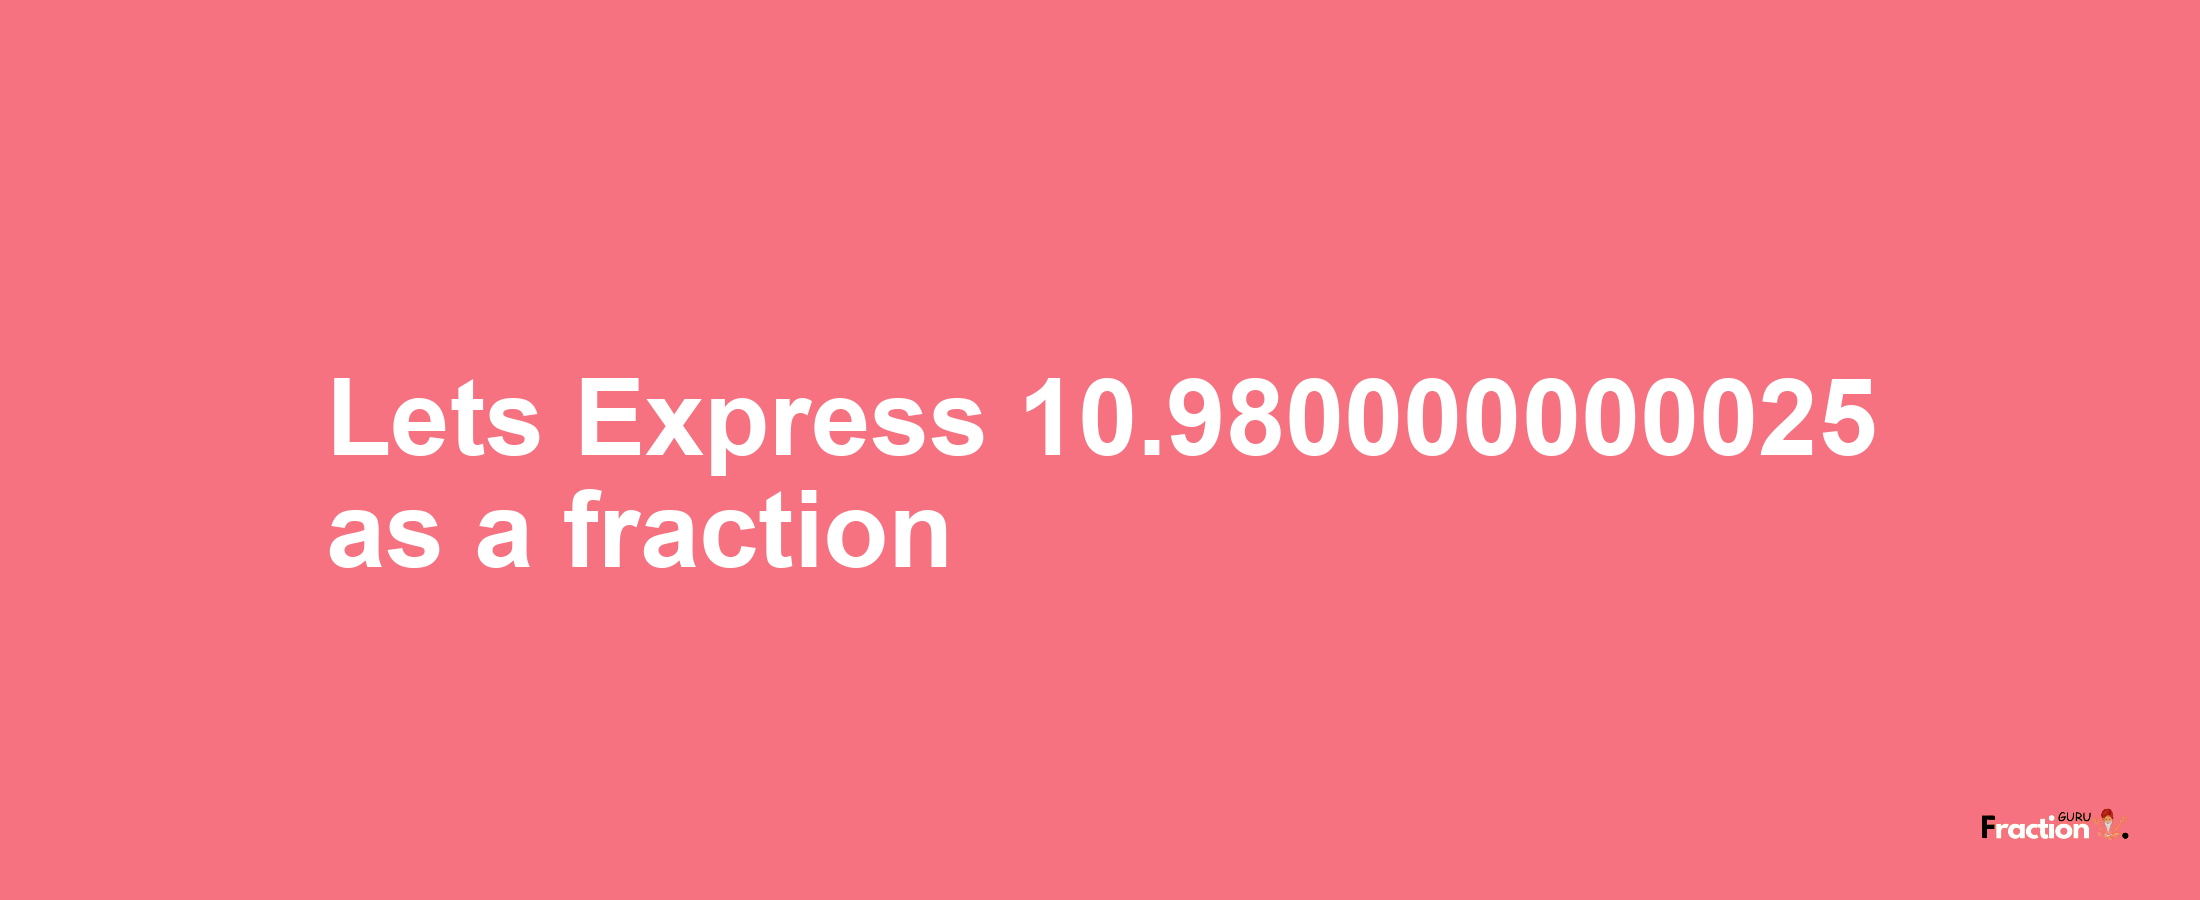 Lets Express 10.980000000025 as afraction